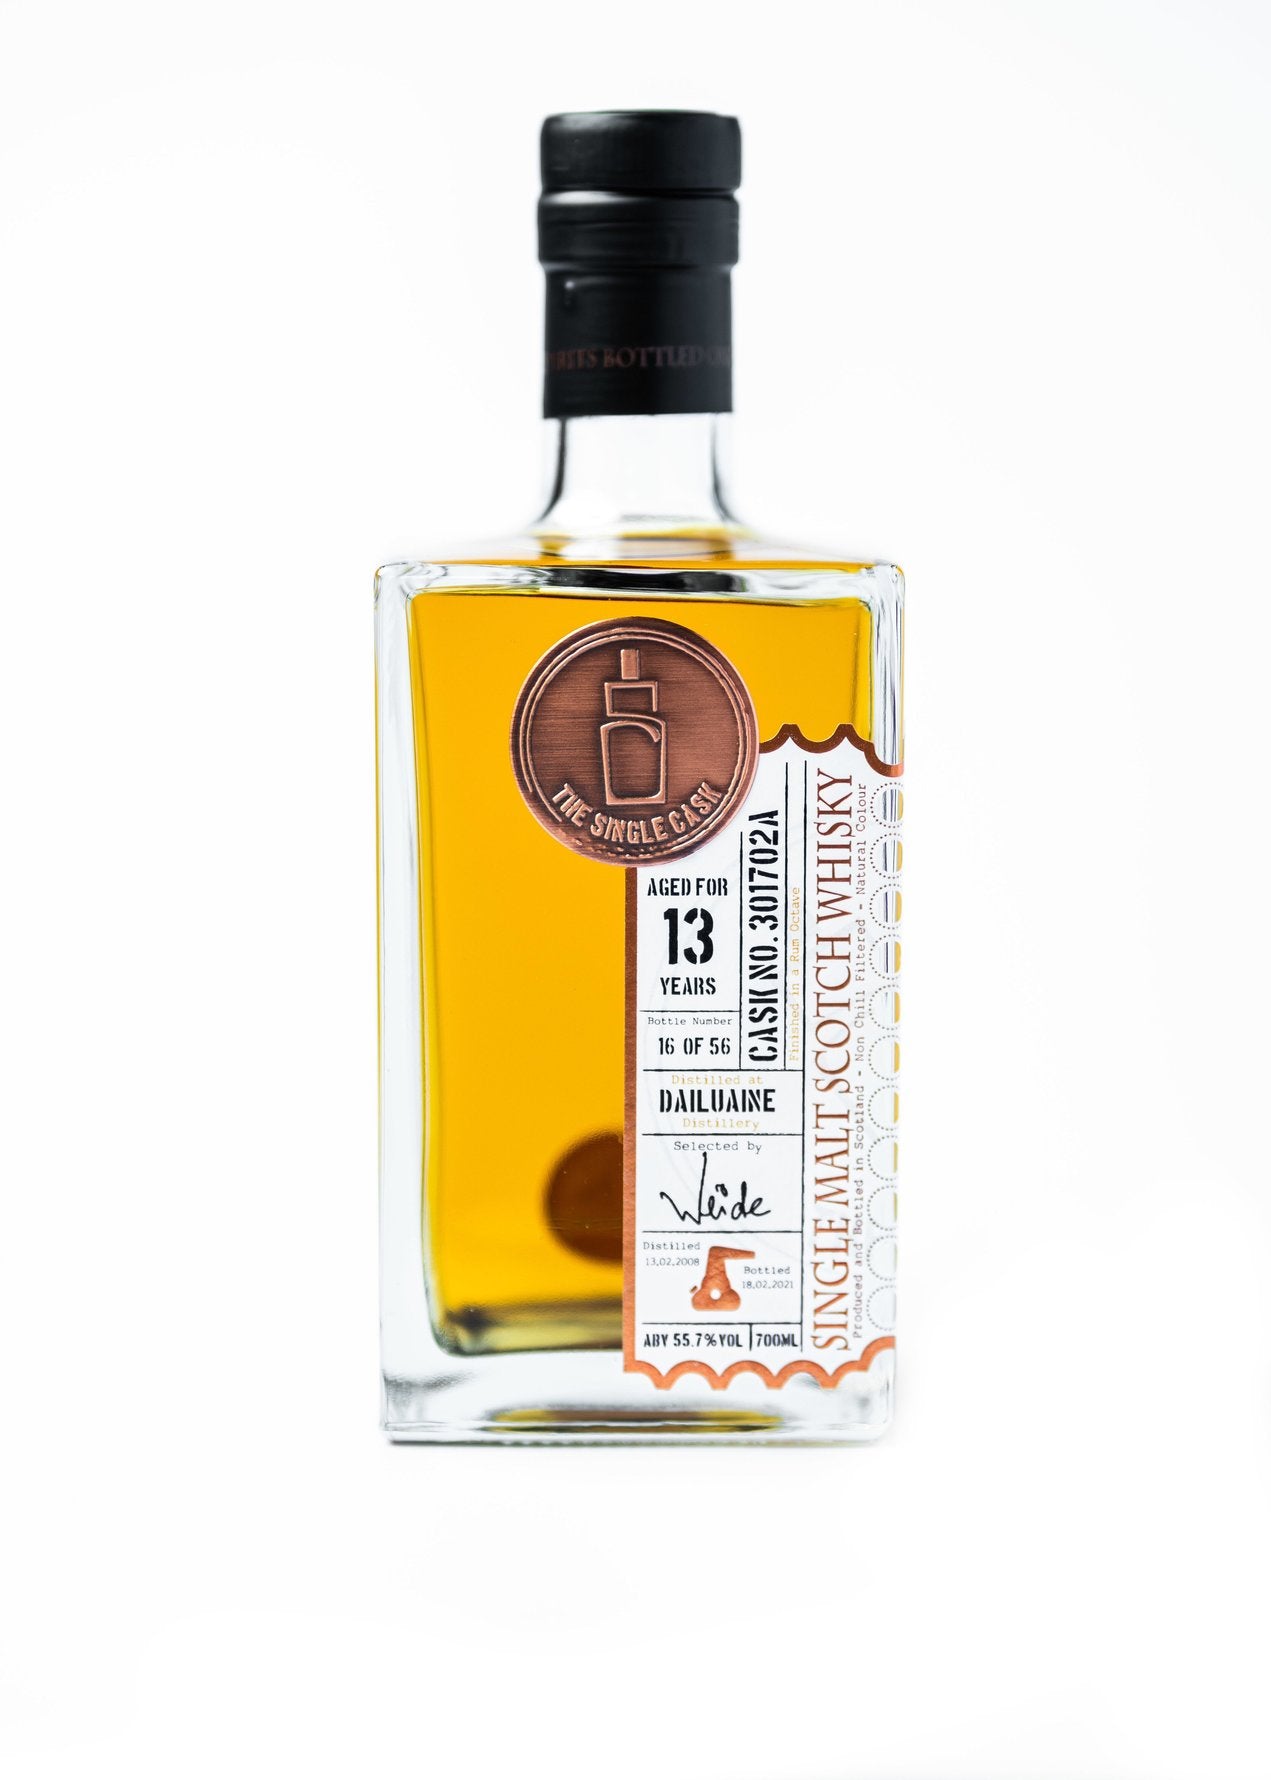 Dailuaine 13 years old scotch whisky by The Single Cask